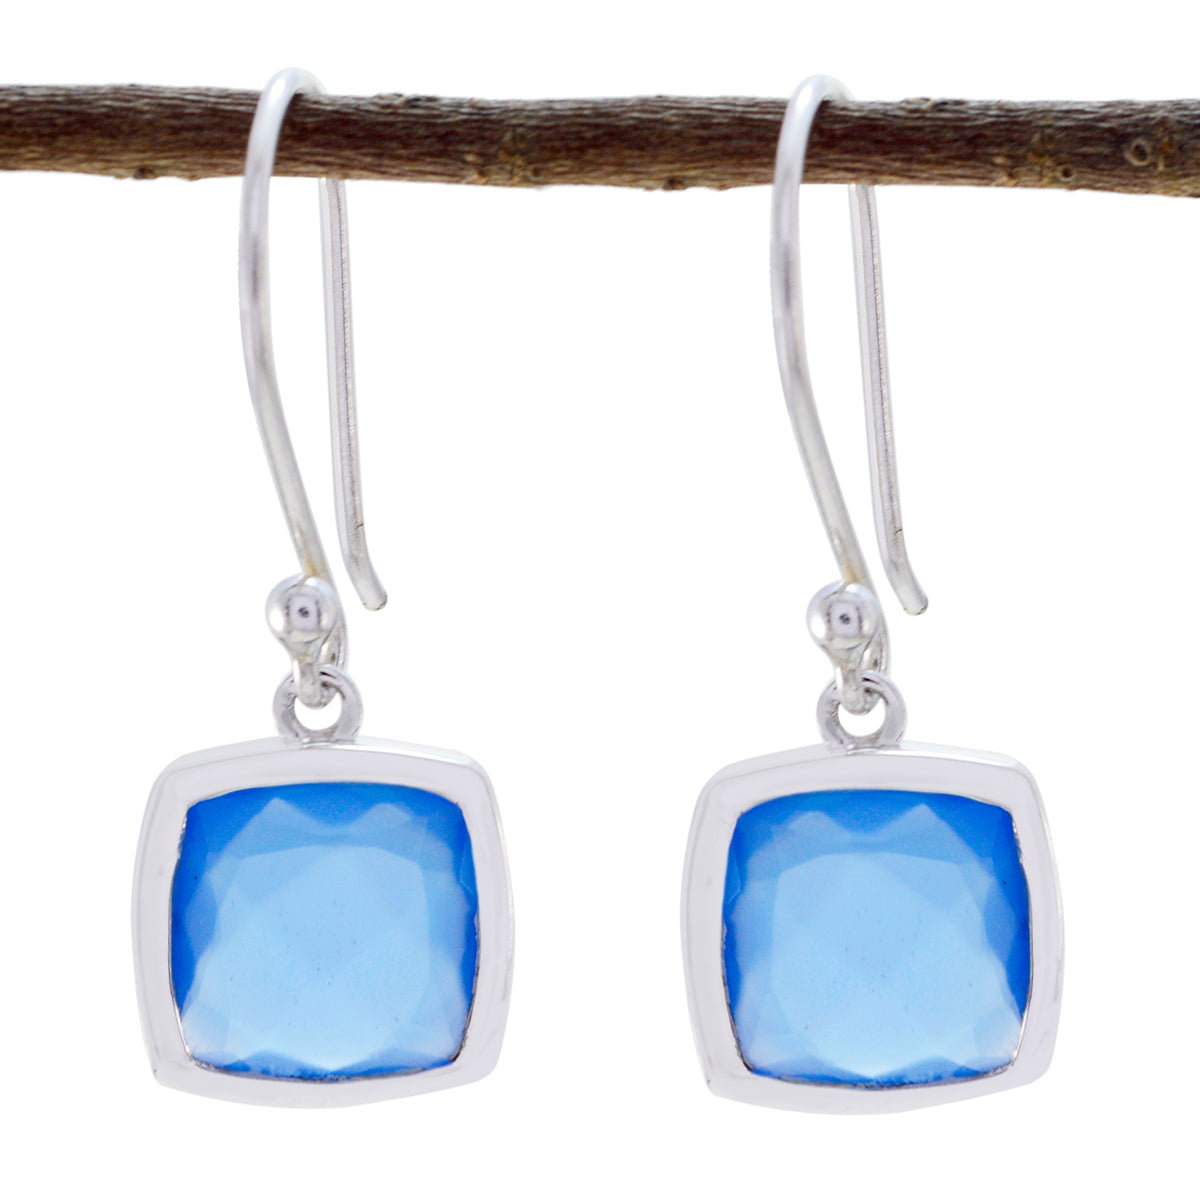 Riyo Real Gemstones Octogon Faceted Blue Chalcedony Silver Earring gift for graduation